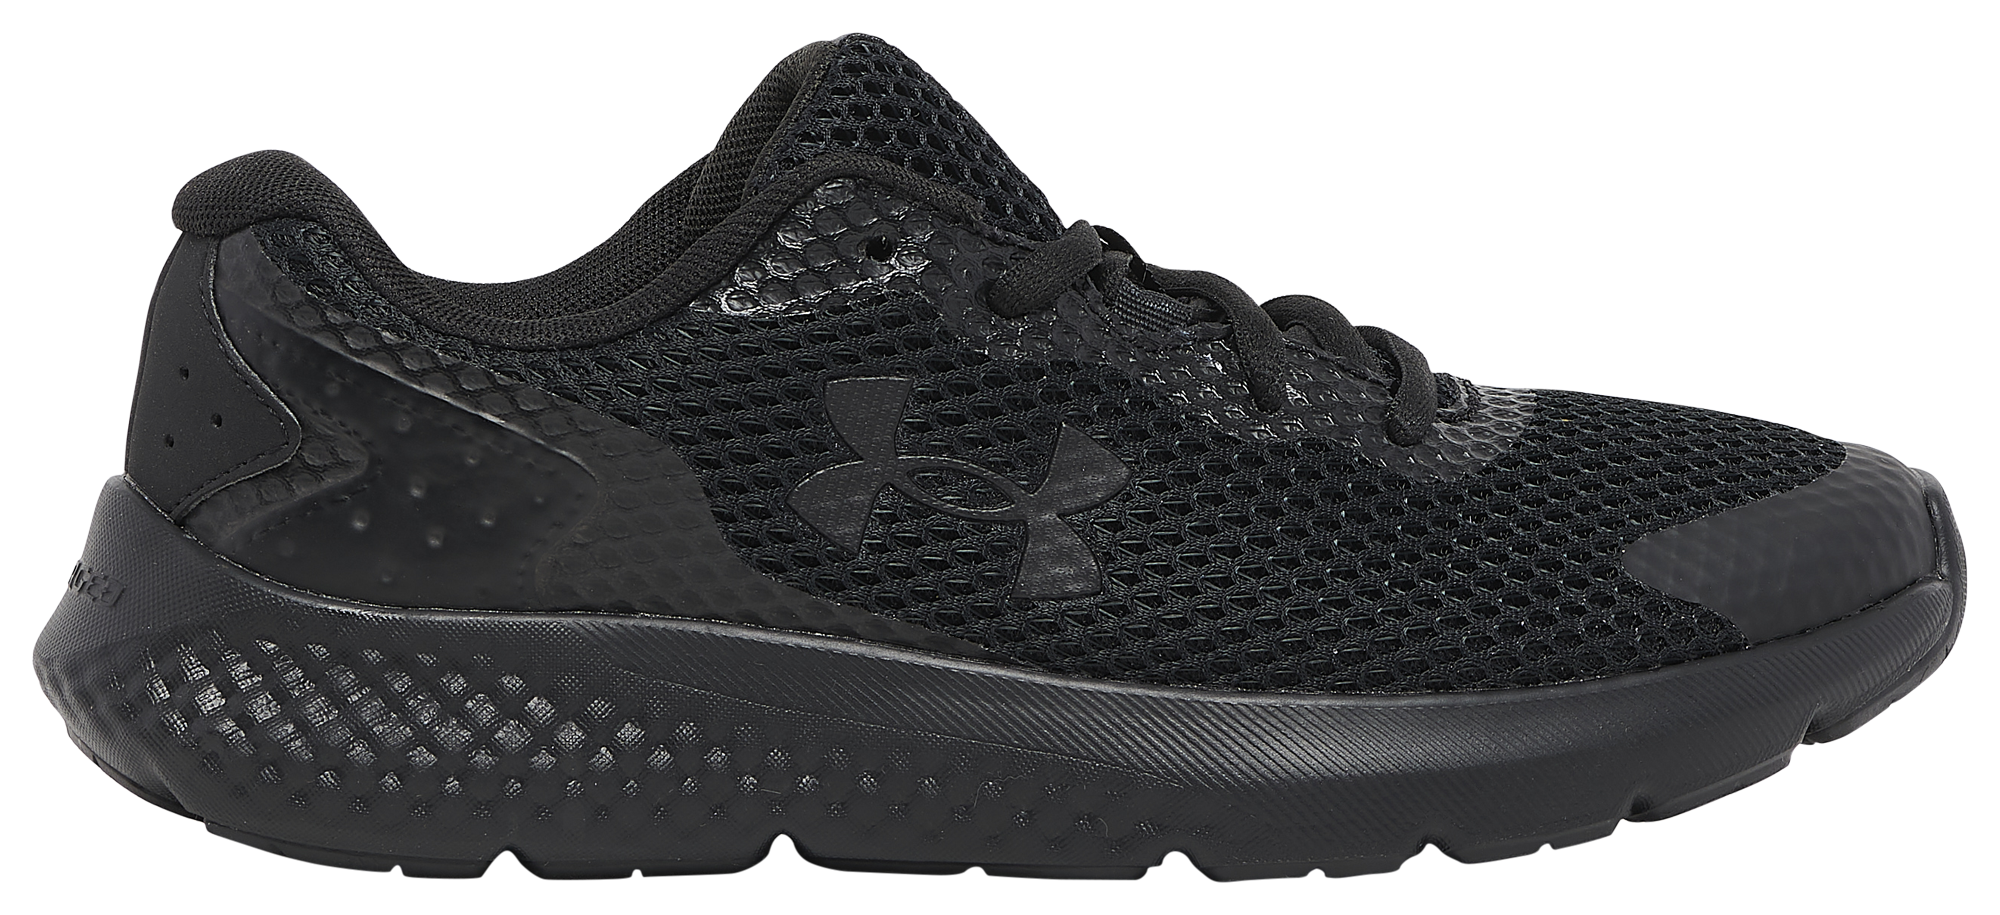 Under Armour Charged Rogue 3 Women's Running Shoes, Black/Mod Grey, 4